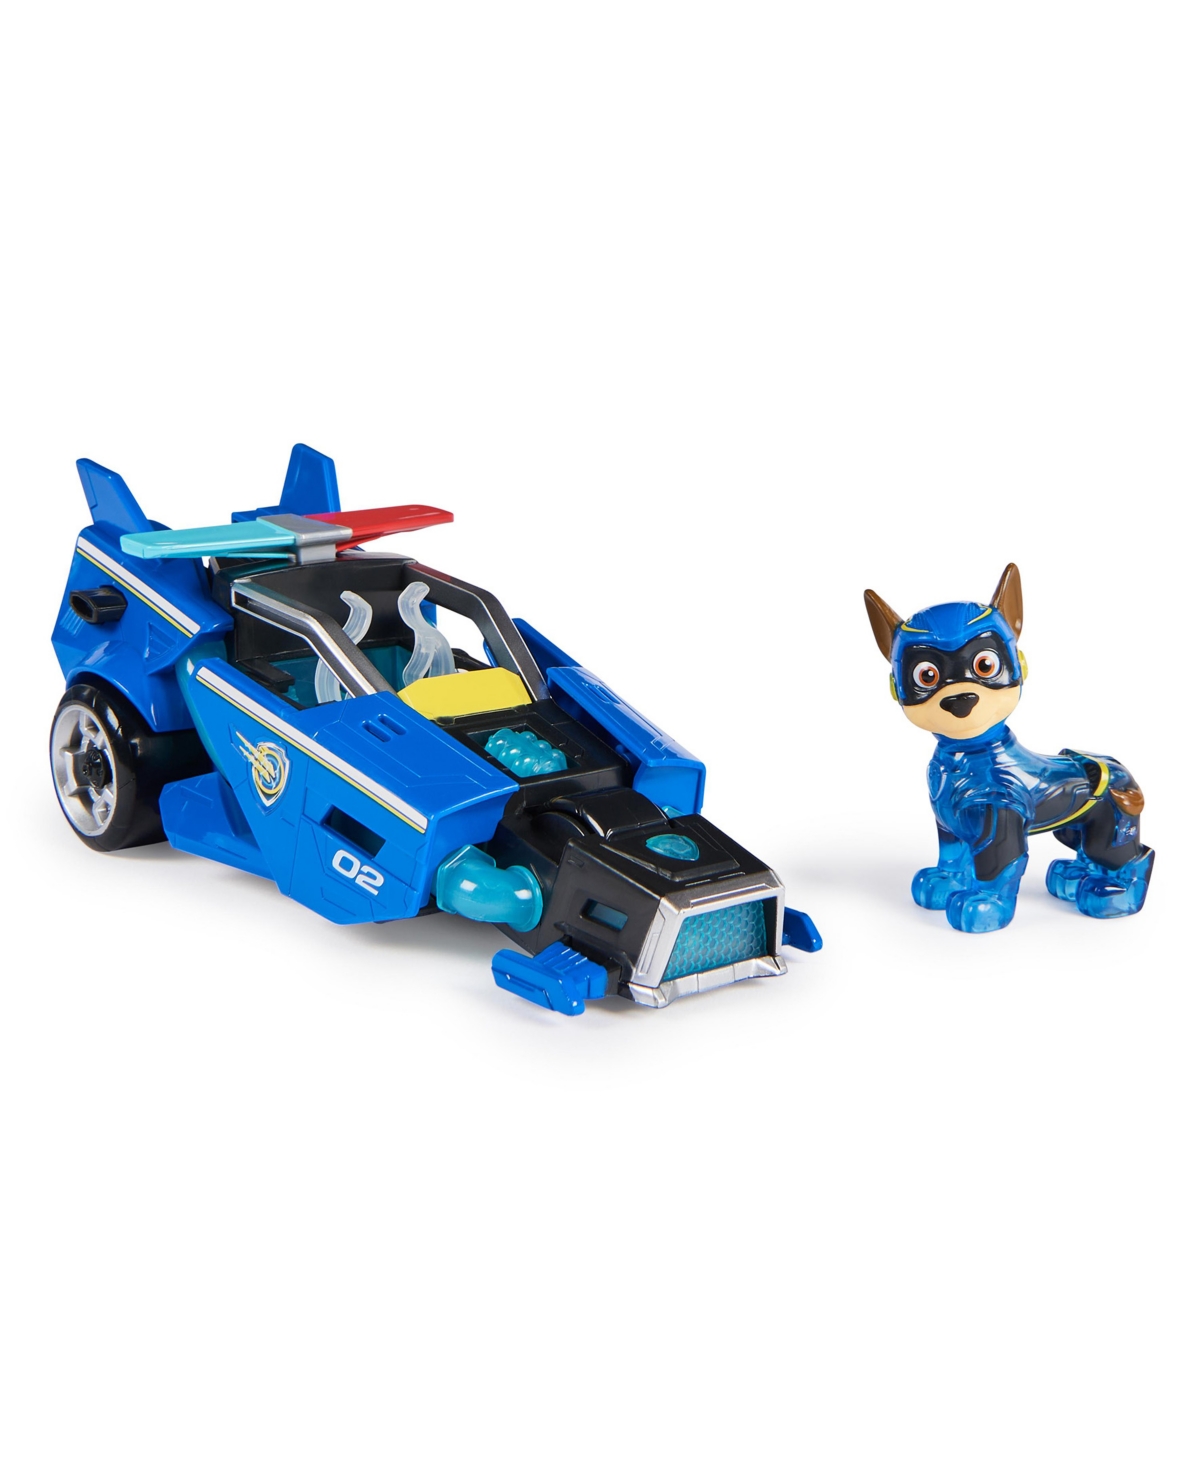 Paw Patrol - The Mighty Movie, Toy Car With Chase Mighty Pups Action Figure In No Color